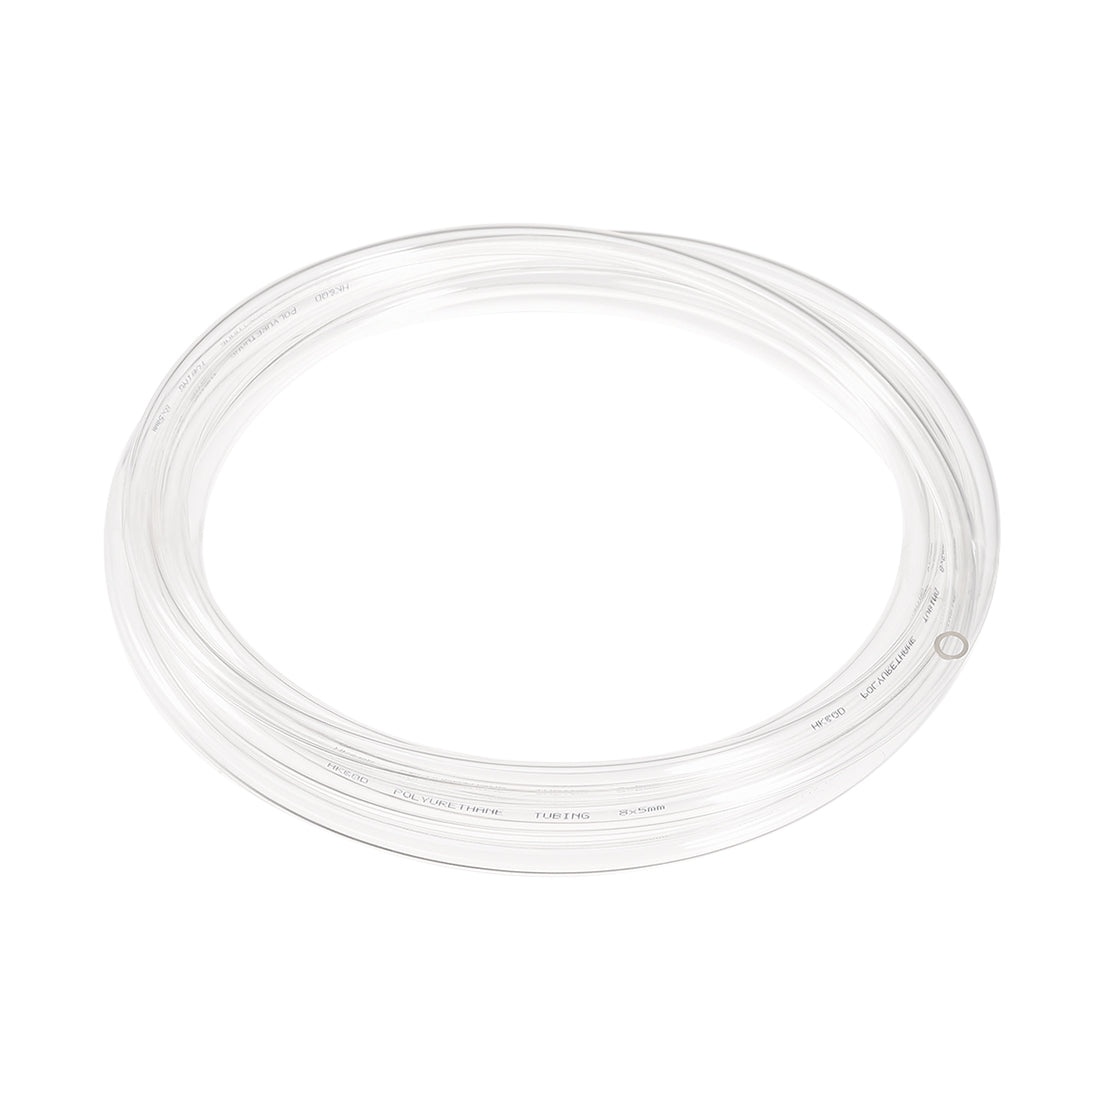 Uxcell Uxcell 8mm OD 5mm ID 7m Long Clear PU Air Tubing Pipe Hose for Air Line Tube Fluid Transfer Pneumatic Tubing